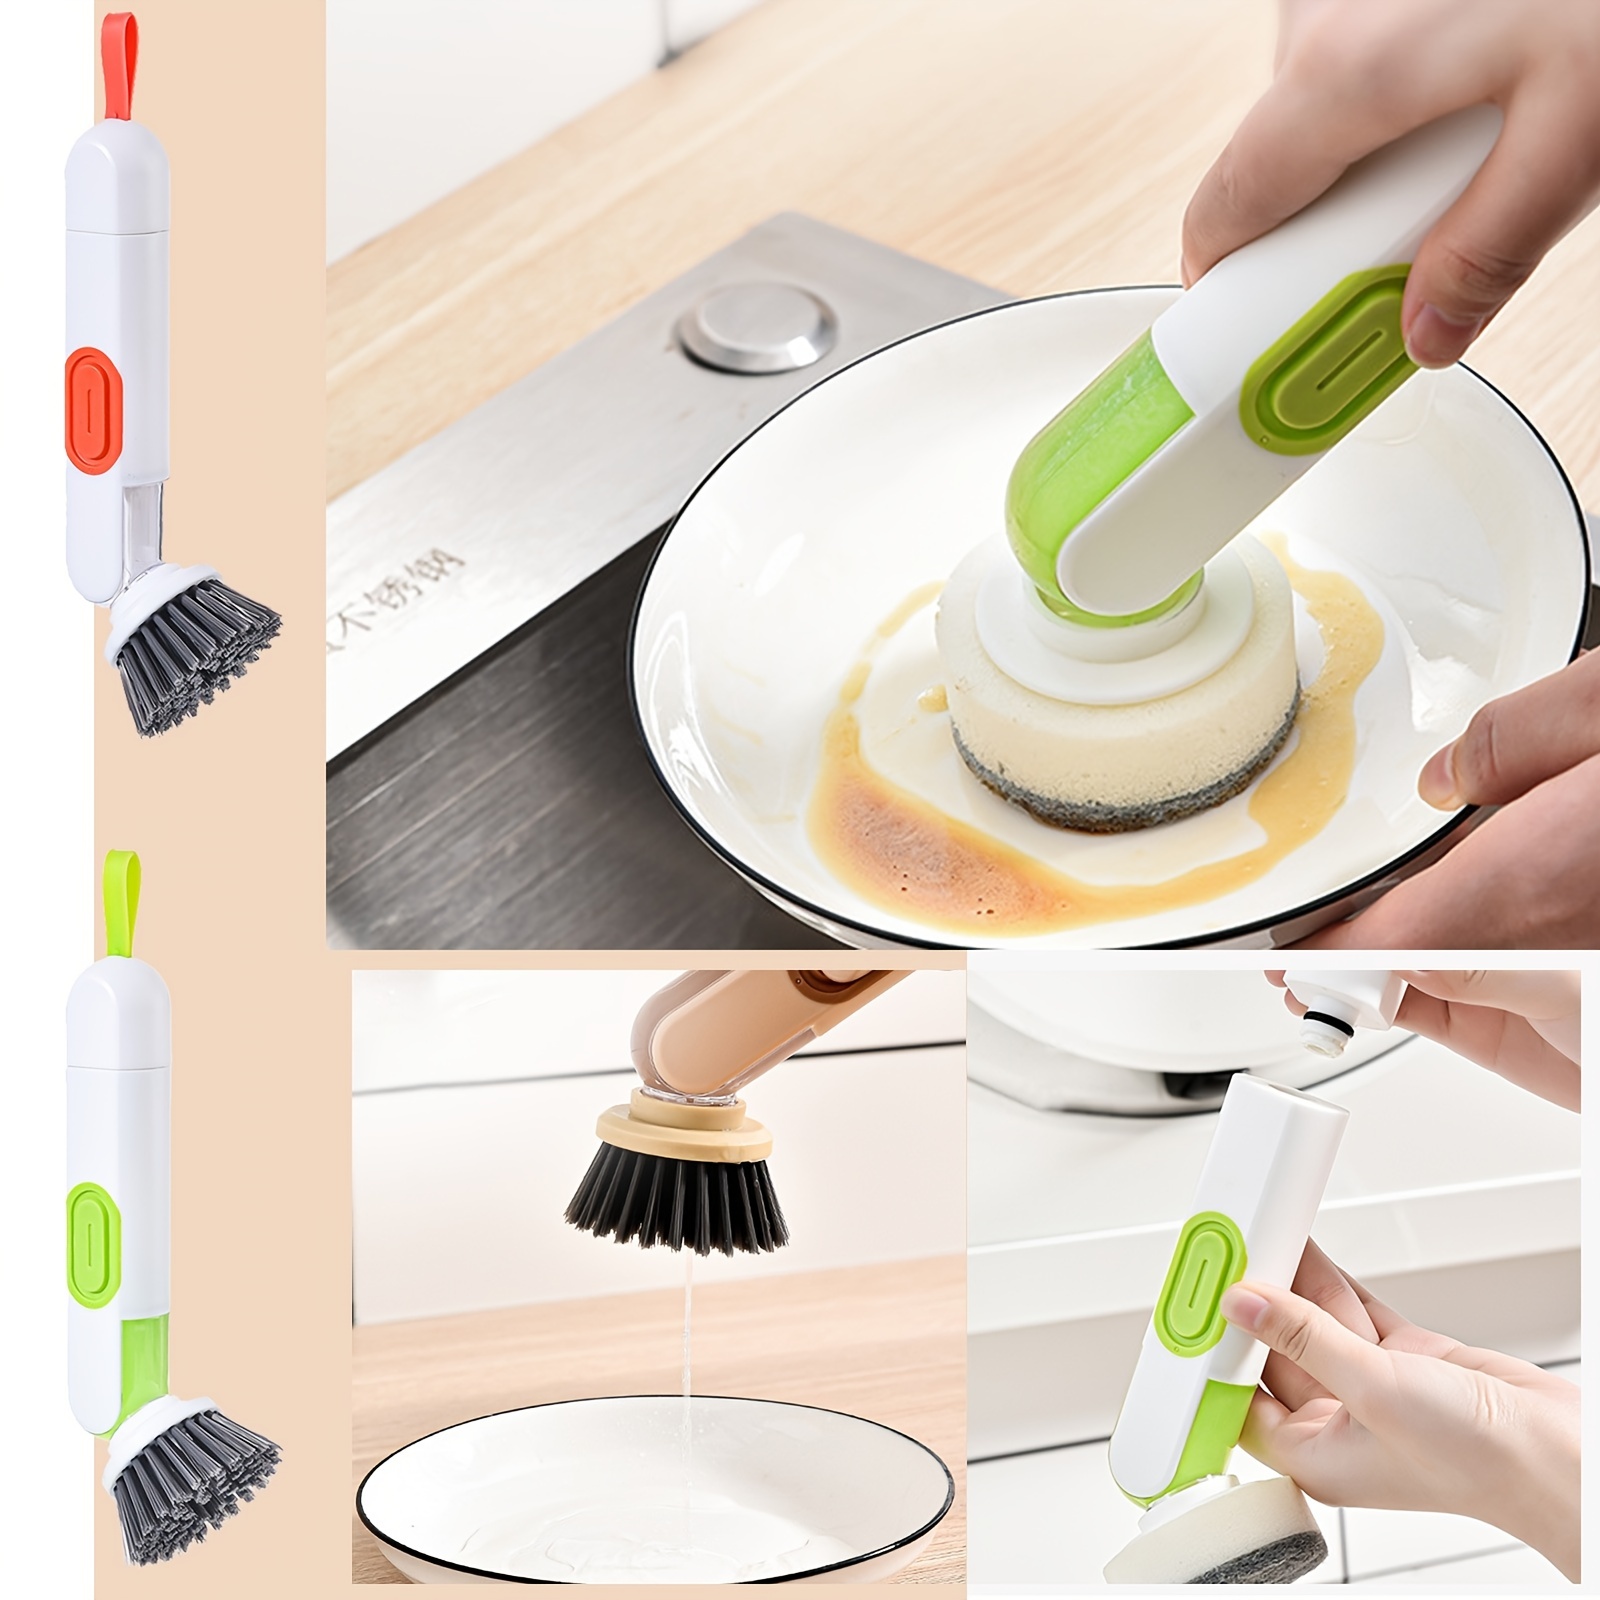 Kitchen Scrub Dish Brush Set with Storage Holder, 4 in 1 Kitchen Cleaning  Brush Set with 2 Interchangeable Brushes, Dish Brush Set for Dishes,  Bottles